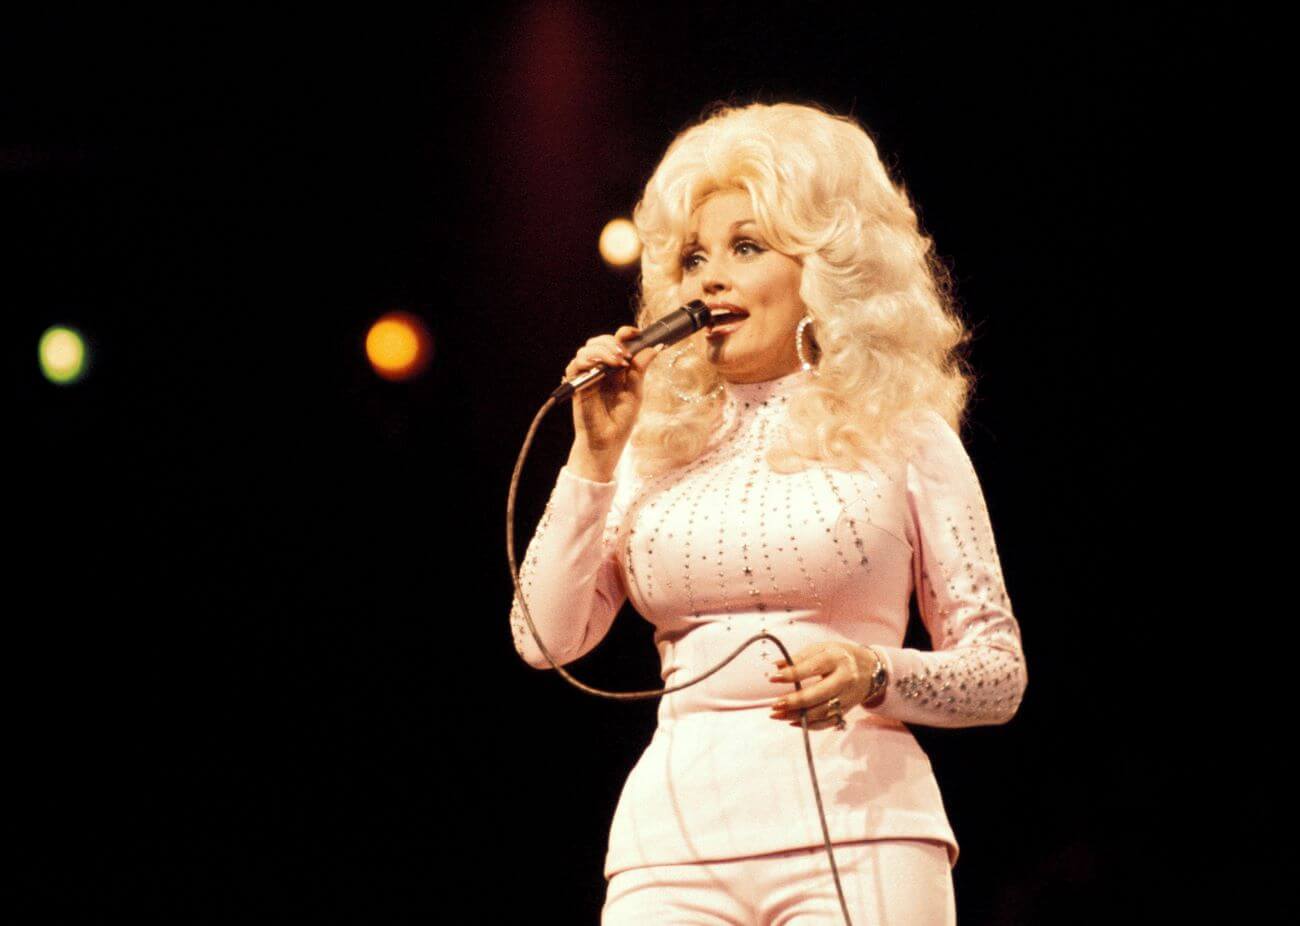 Dolly Parton wears a white outfit and holds a microphone.